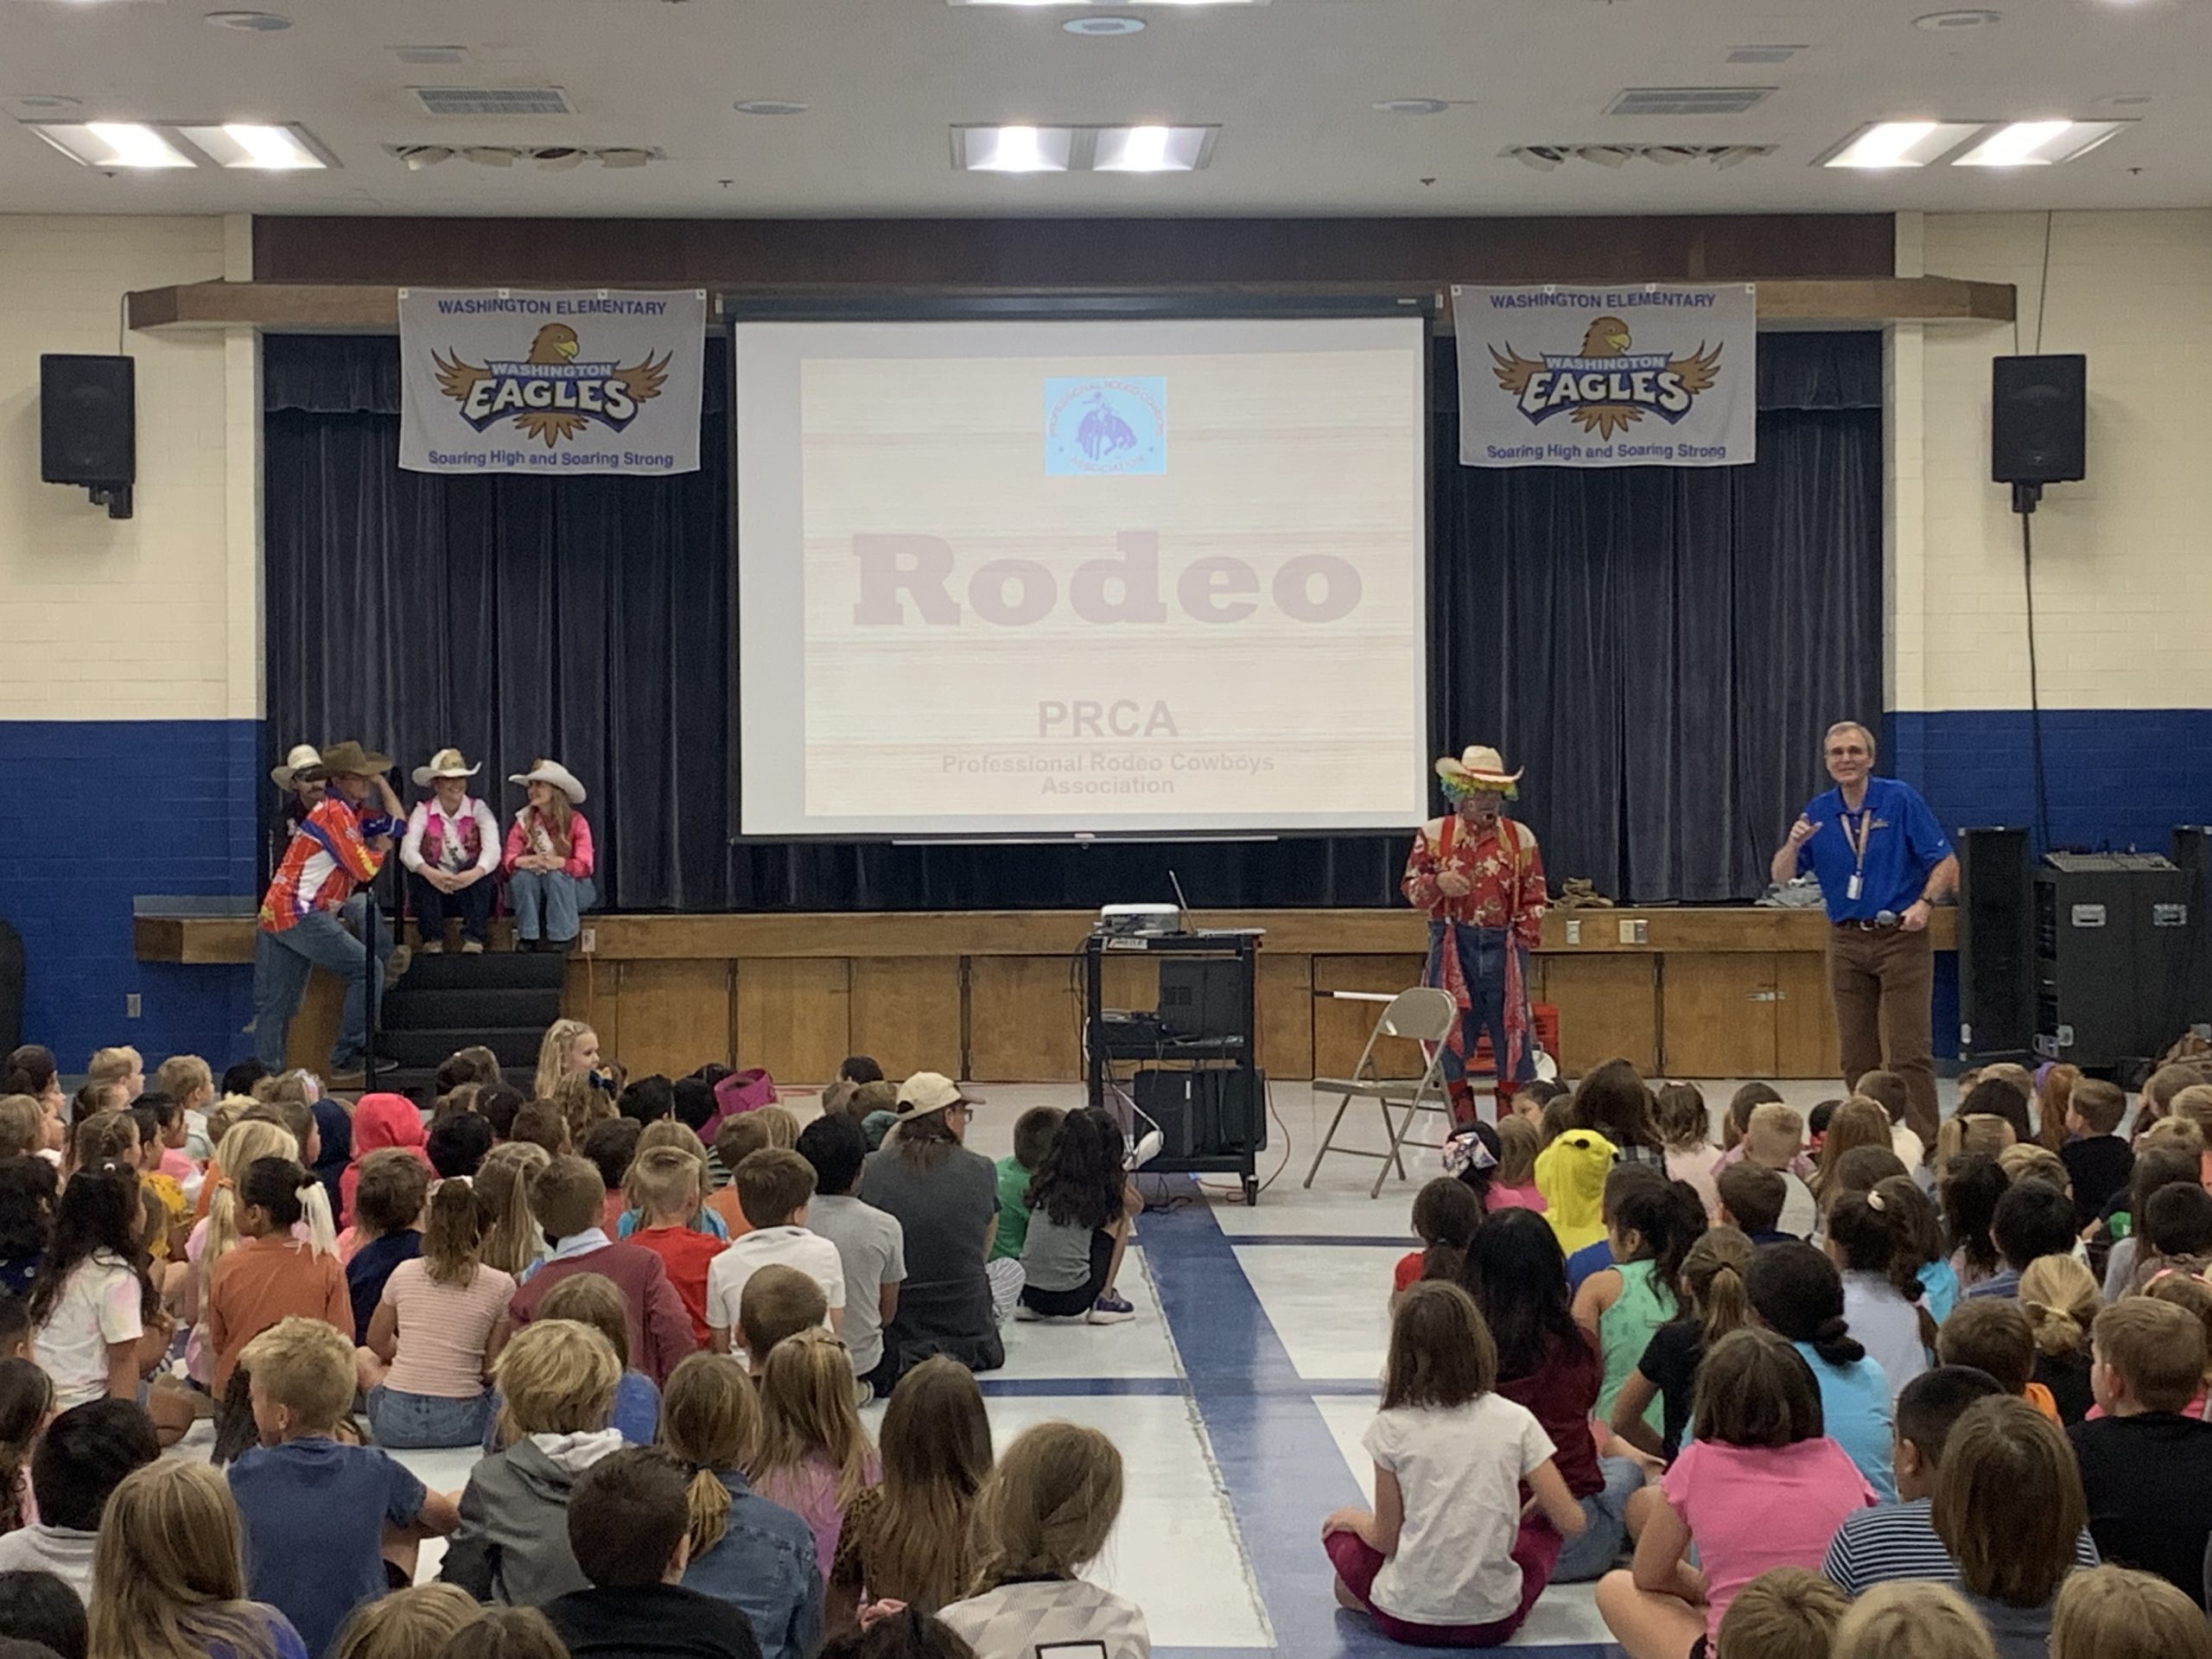 The Professional Rodeo Cowboys Association came and provided an assembly for our students